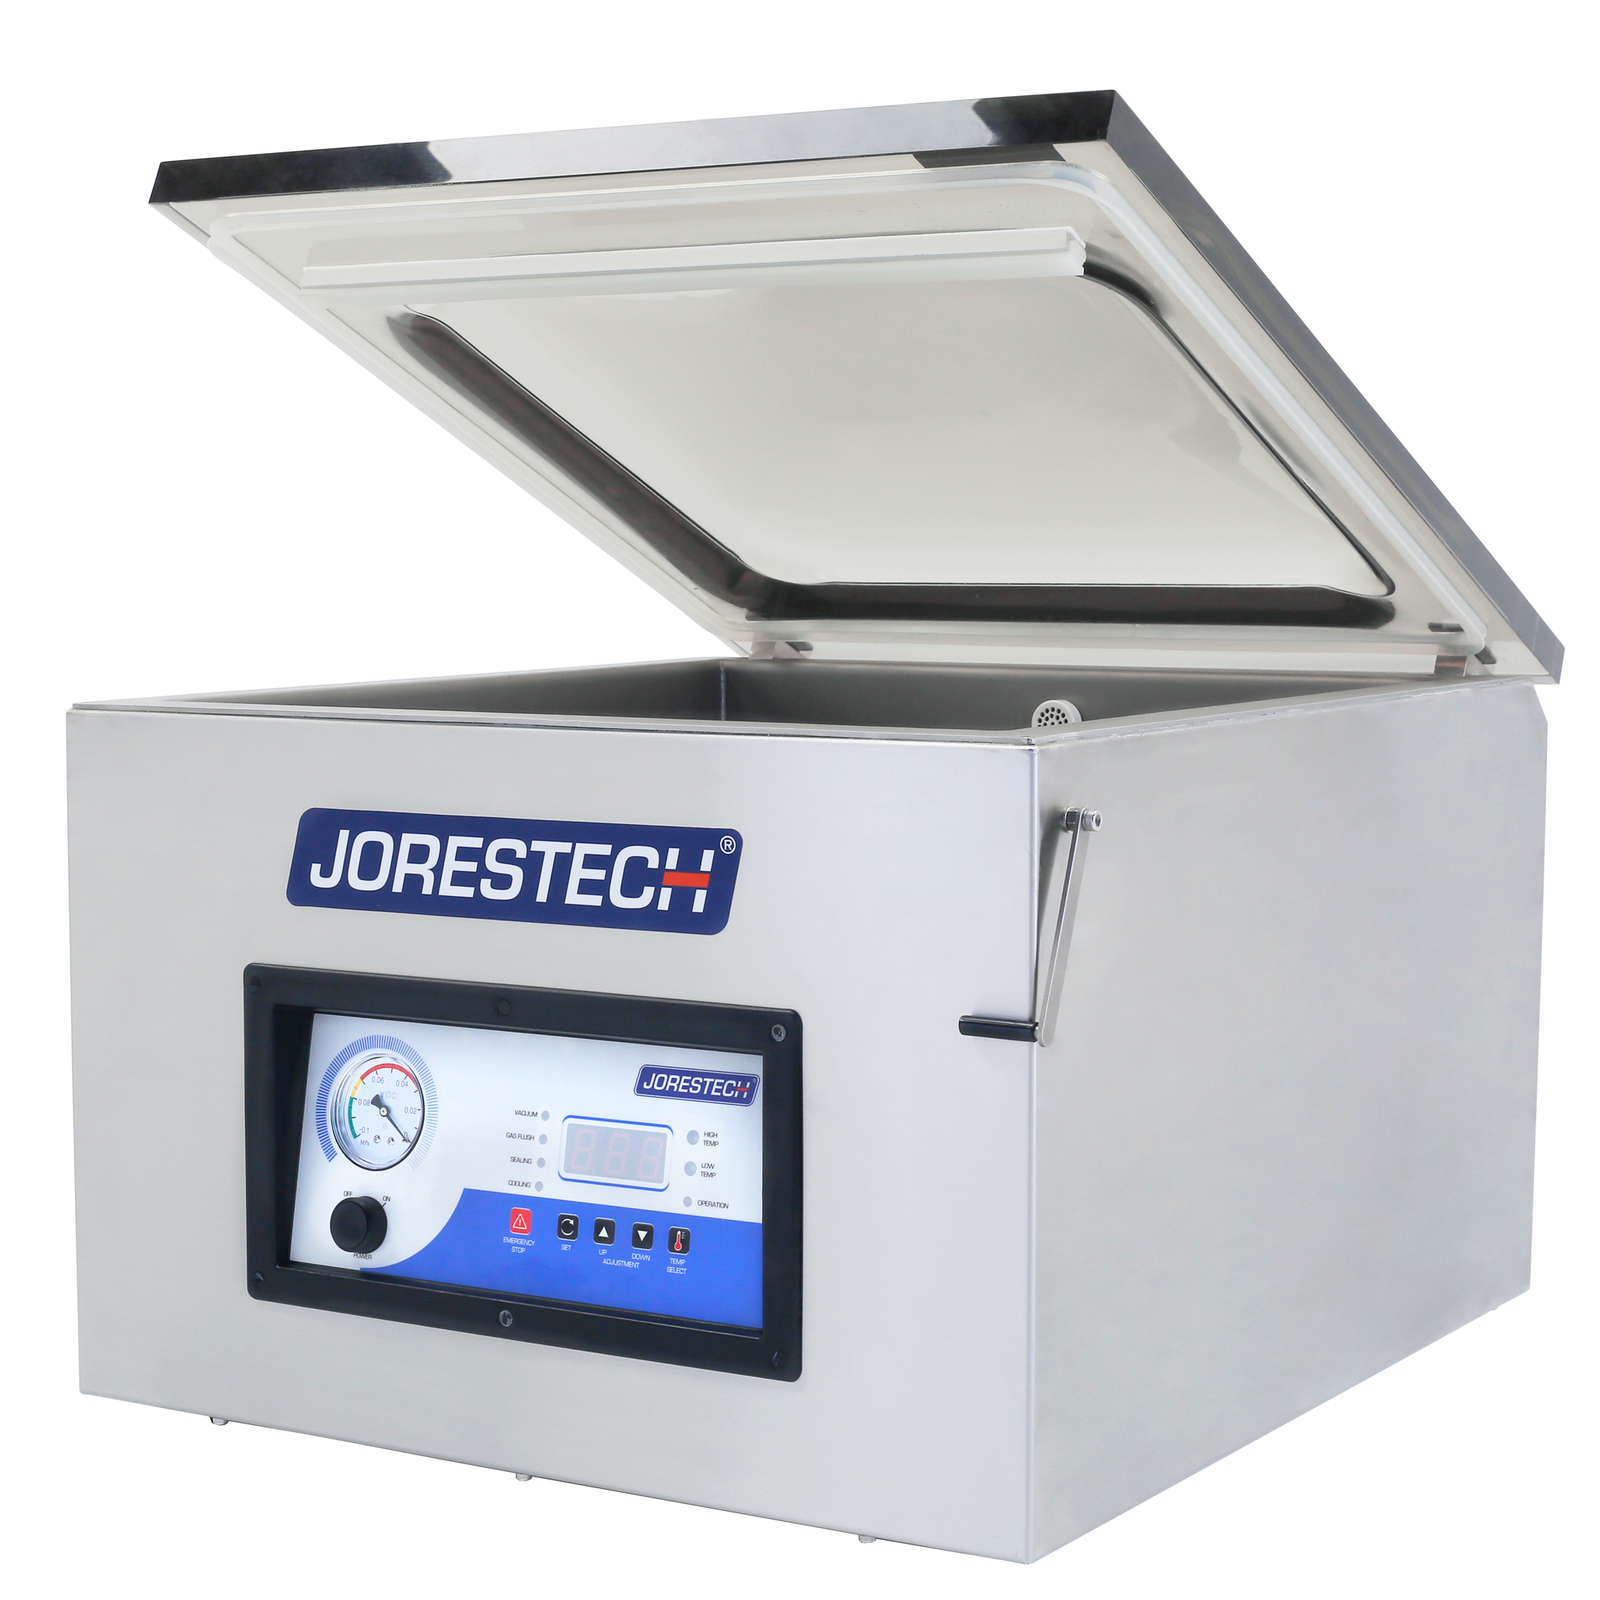 Side of the stainless steel JORESTECH tabletop single chamber vacuum sealing machine